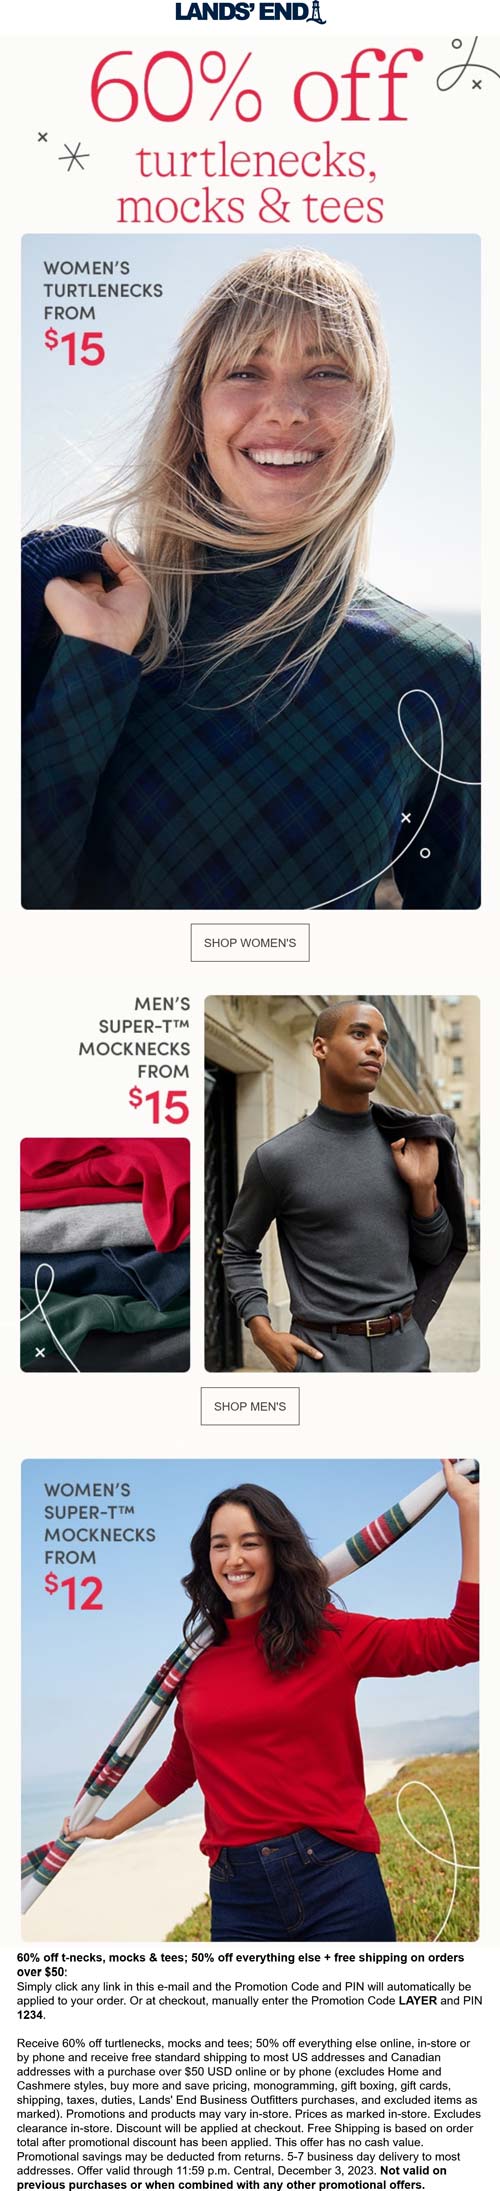 Lands End stores Coupon  50-60% off everything today at Lands End via promo code LAYER and pin 1234 #landsend, or online via promo code #landsend 